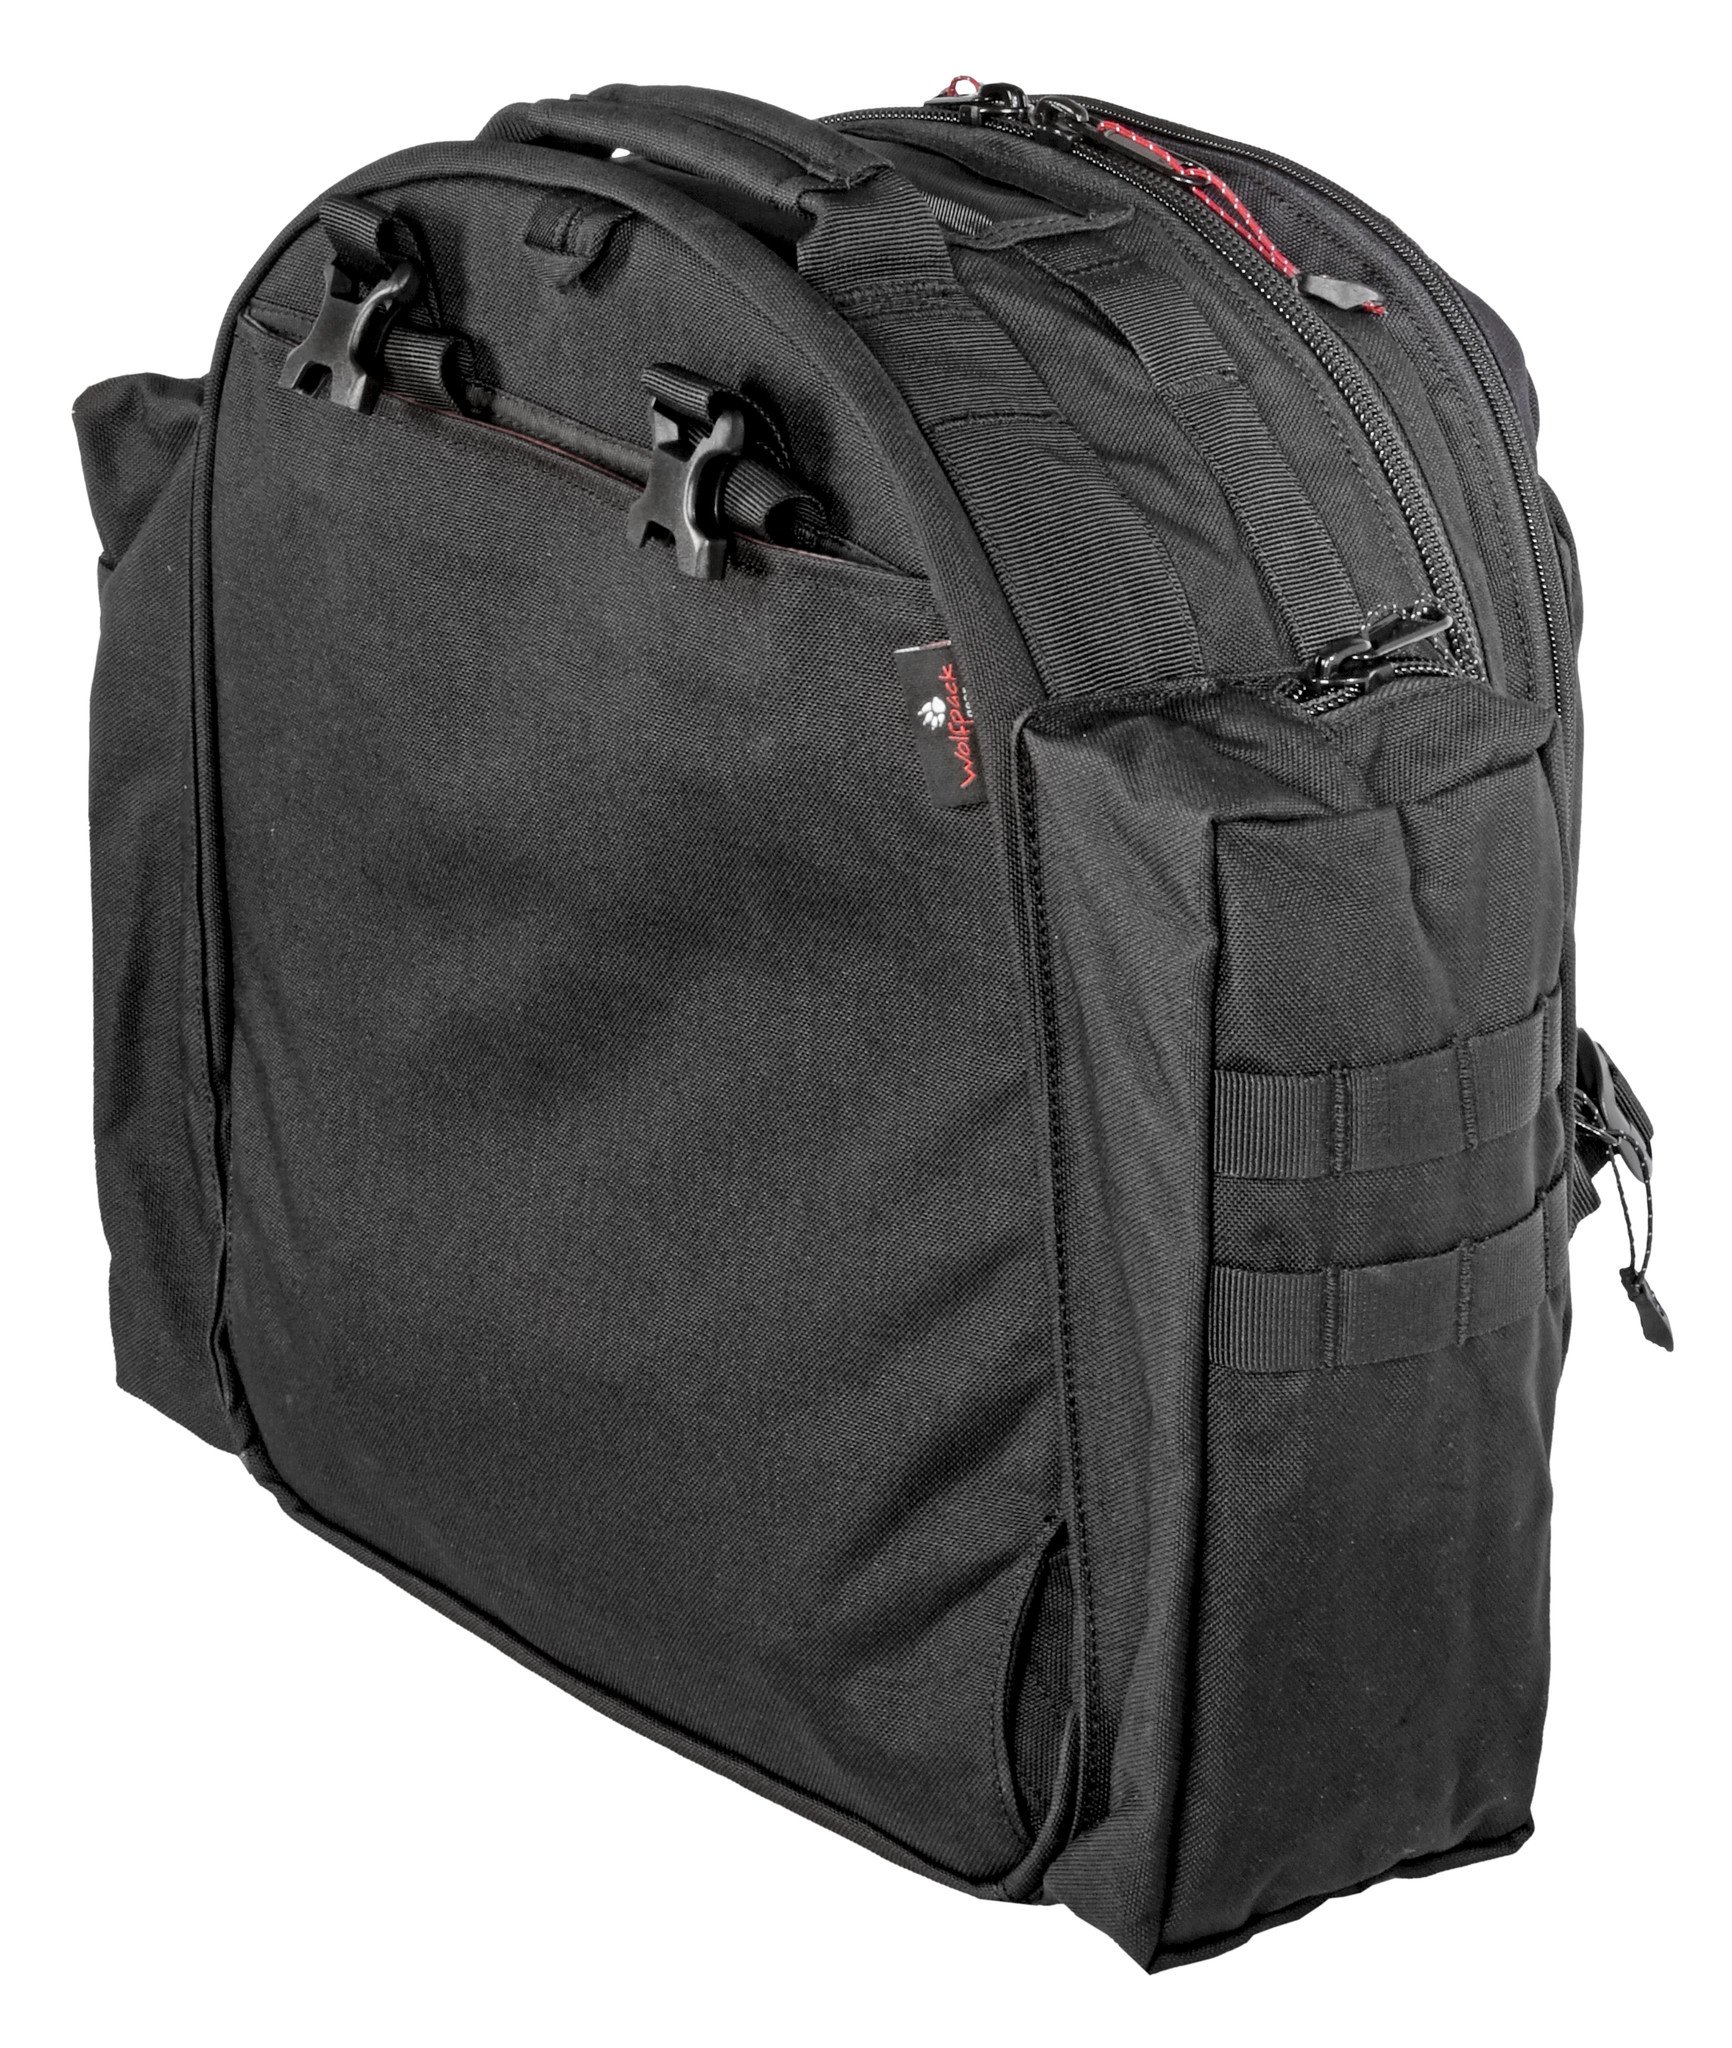 Wolfpack Gear Wolfpack USAR Mission Backpack